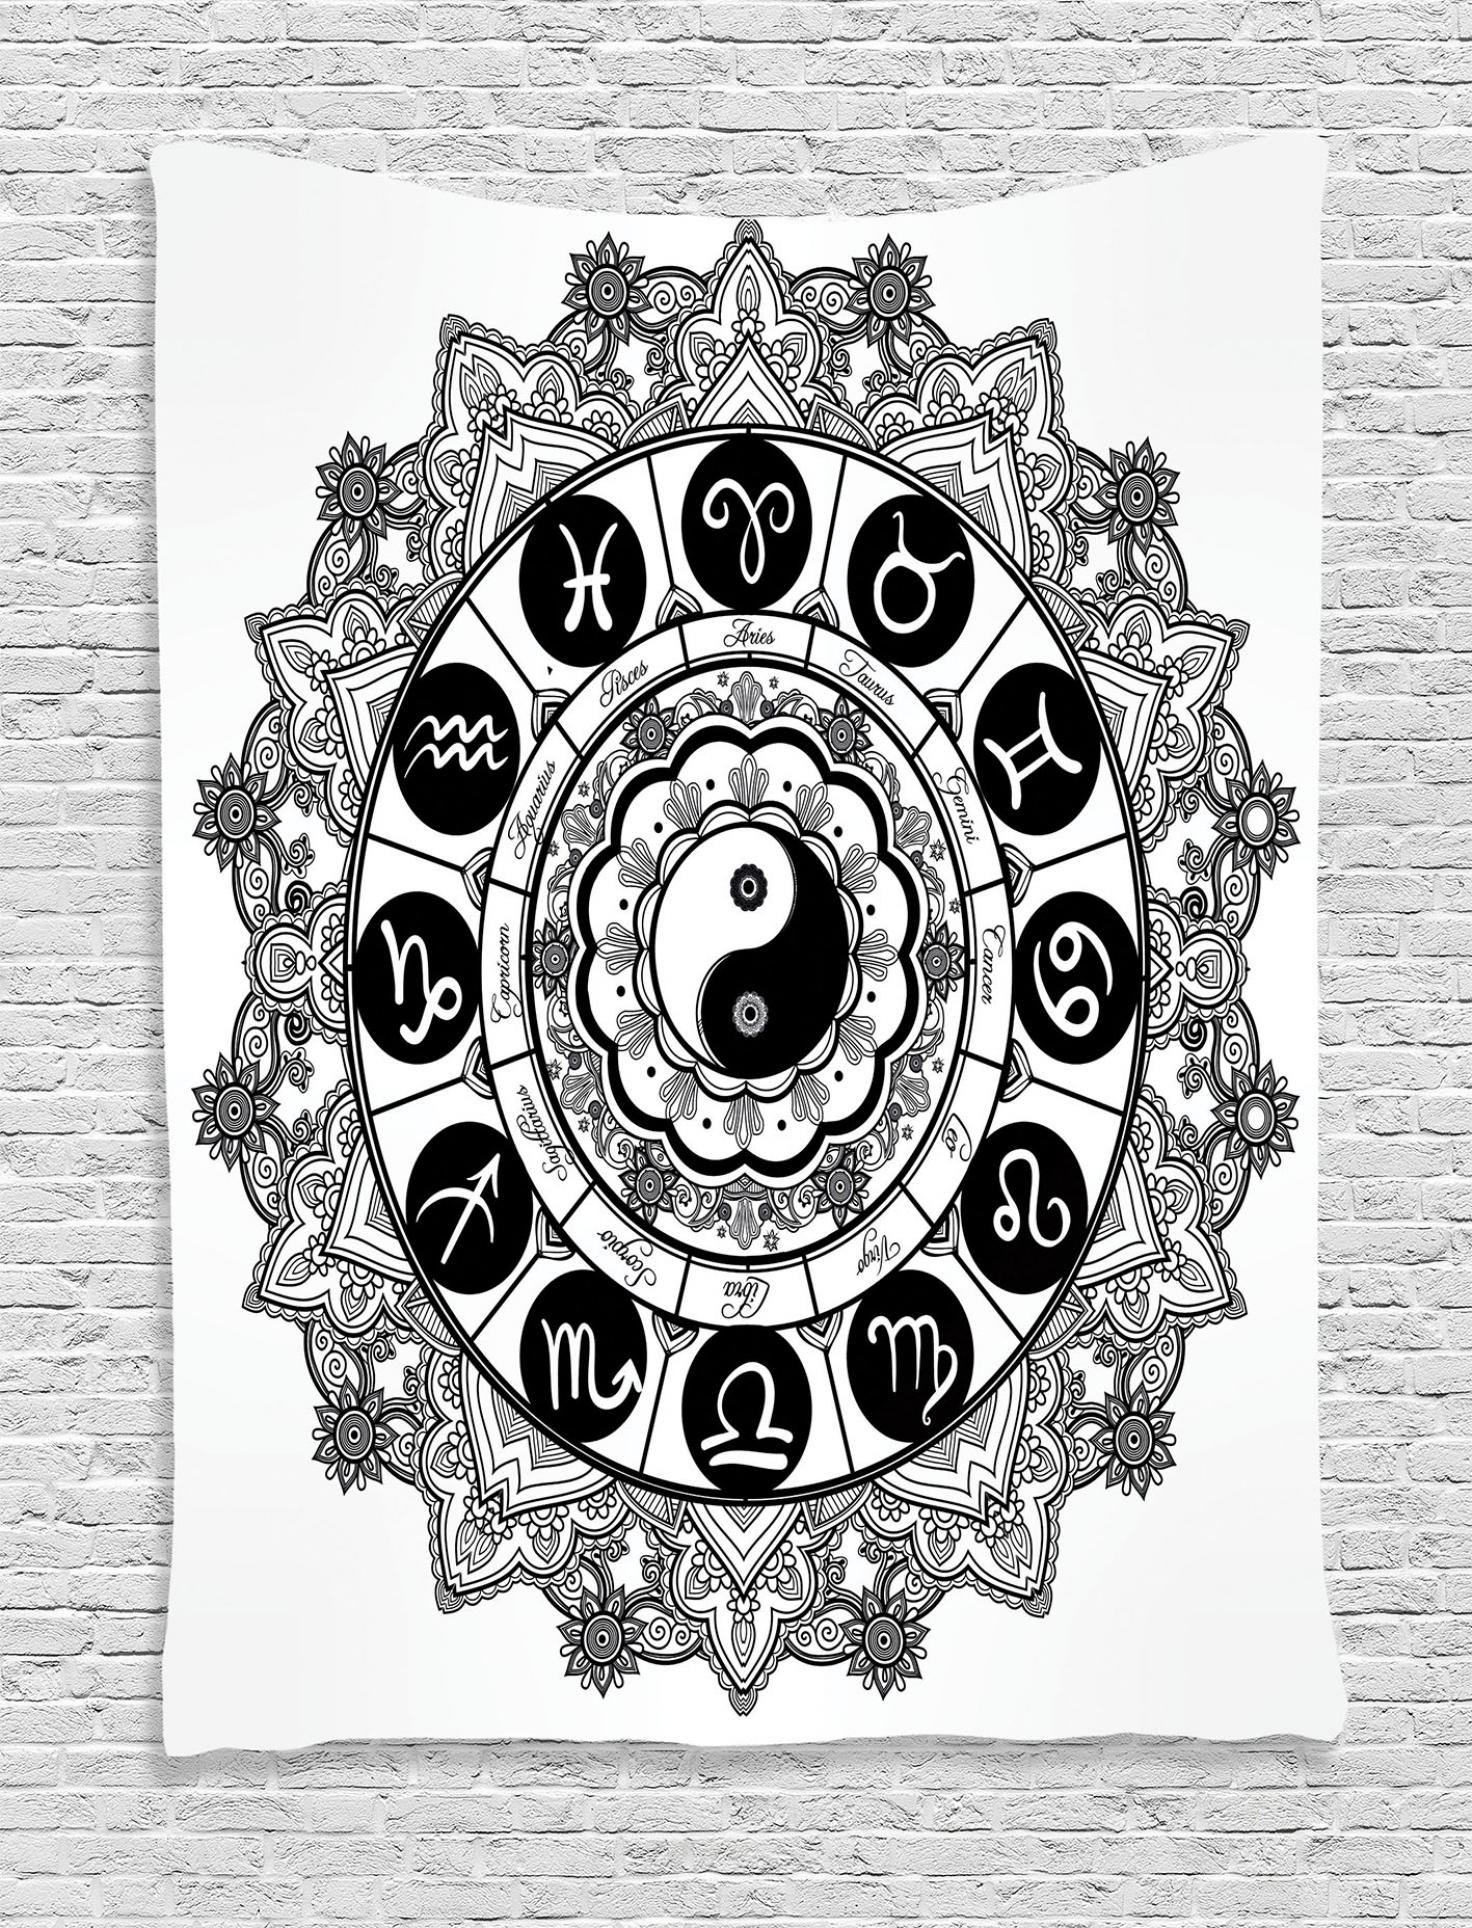 Ying Yang Tapestry, Round Zodiac Theme Design with Yin Yang Symbol in ...